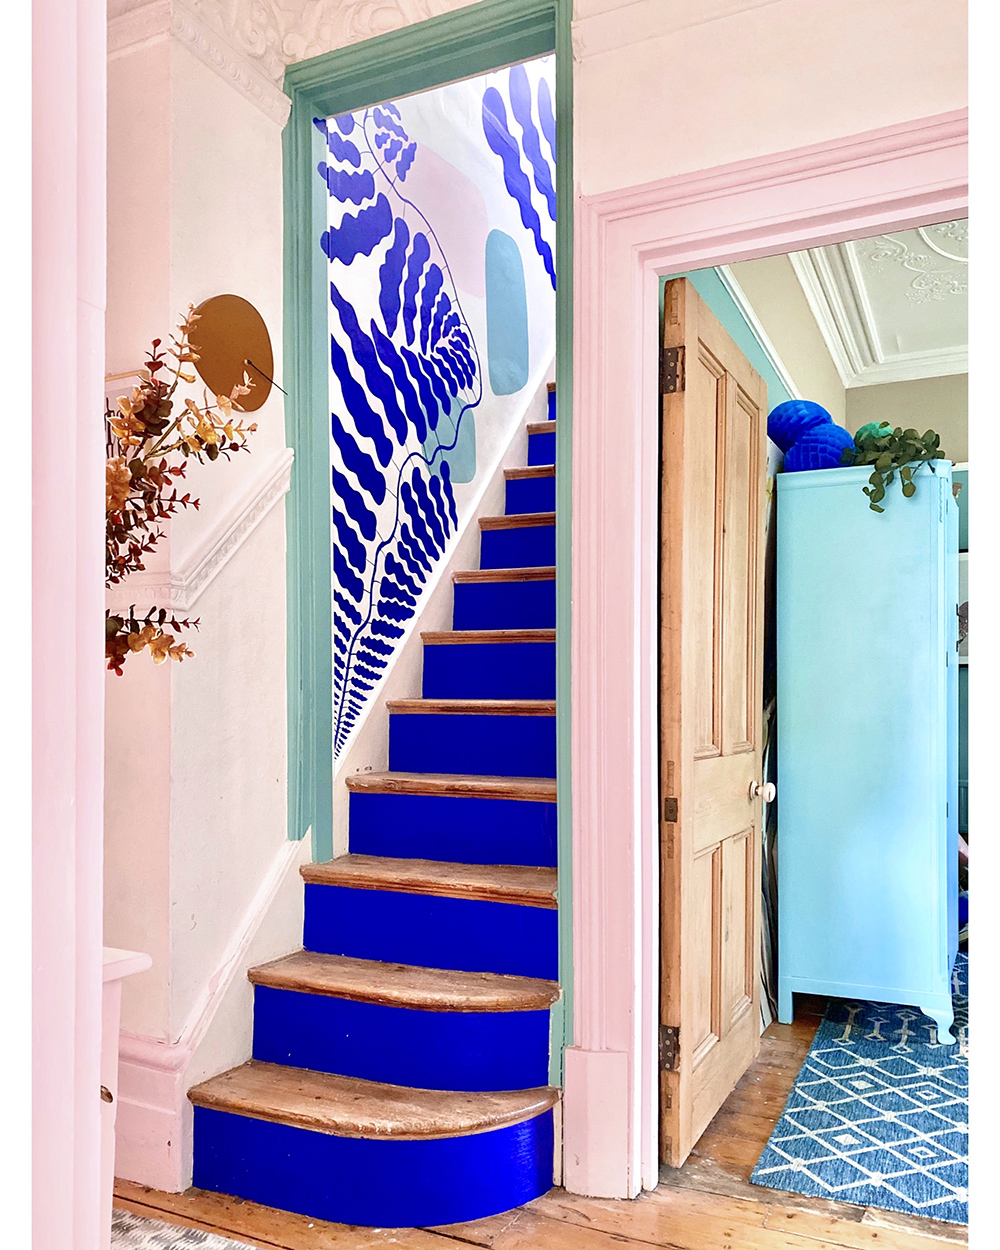 Colour palette inspiration from this gorgeous pastel pink and bright blue hallway by Anna Jacobs